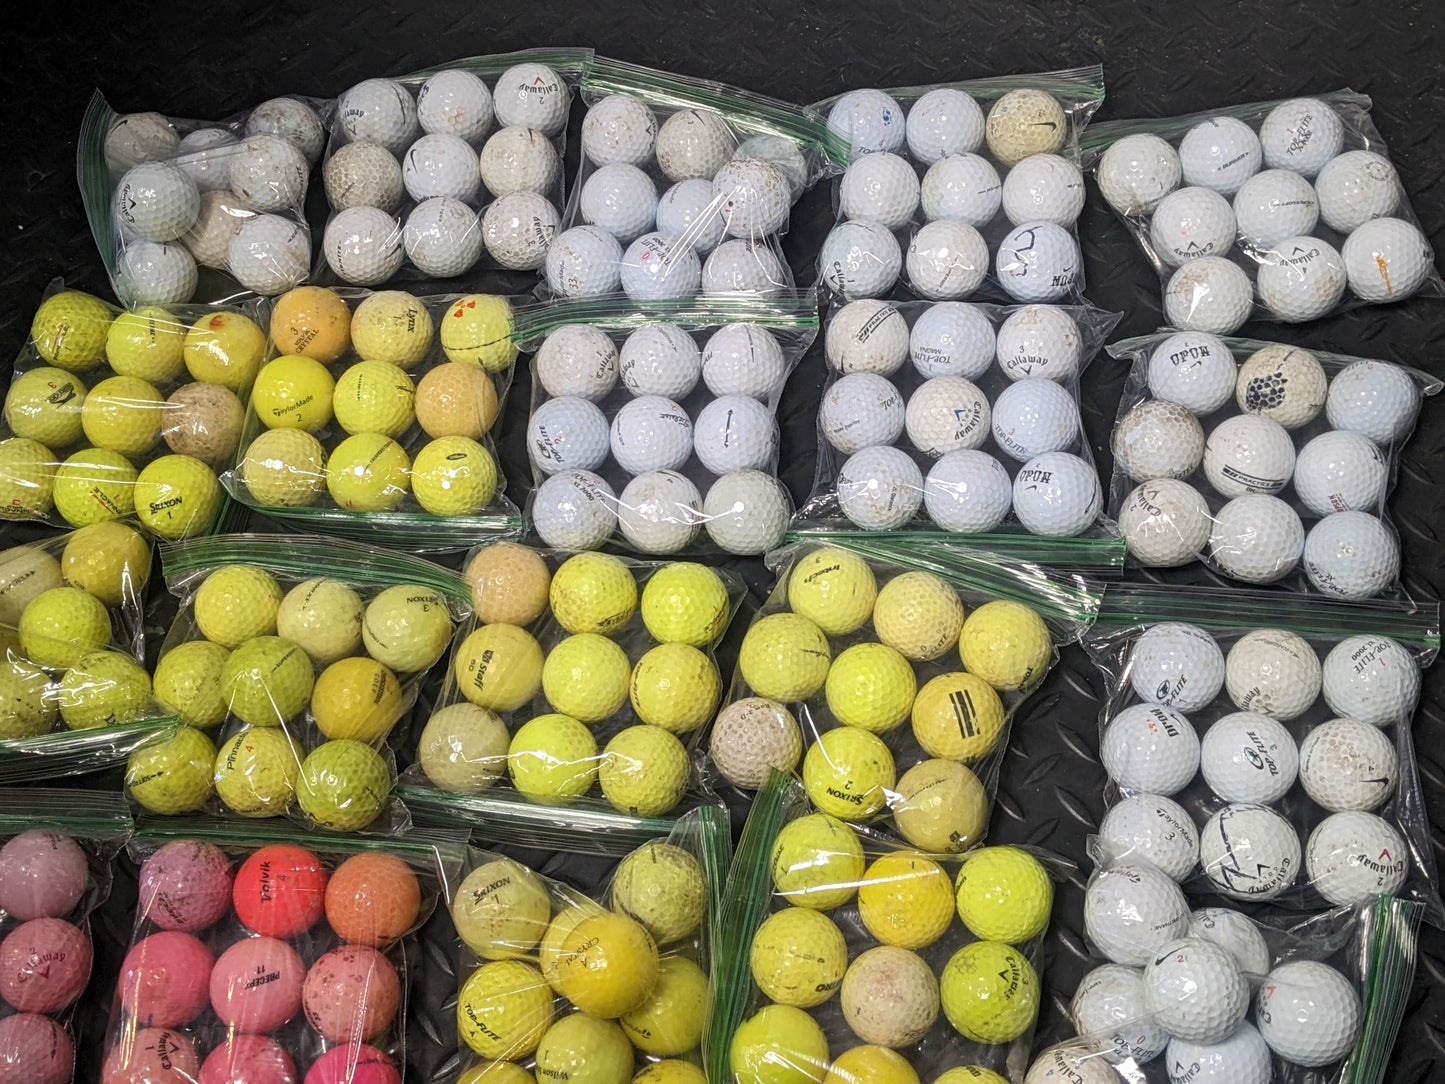 Golf Balls Size 9 Balls Color Assorted Condition Used Variety Pack